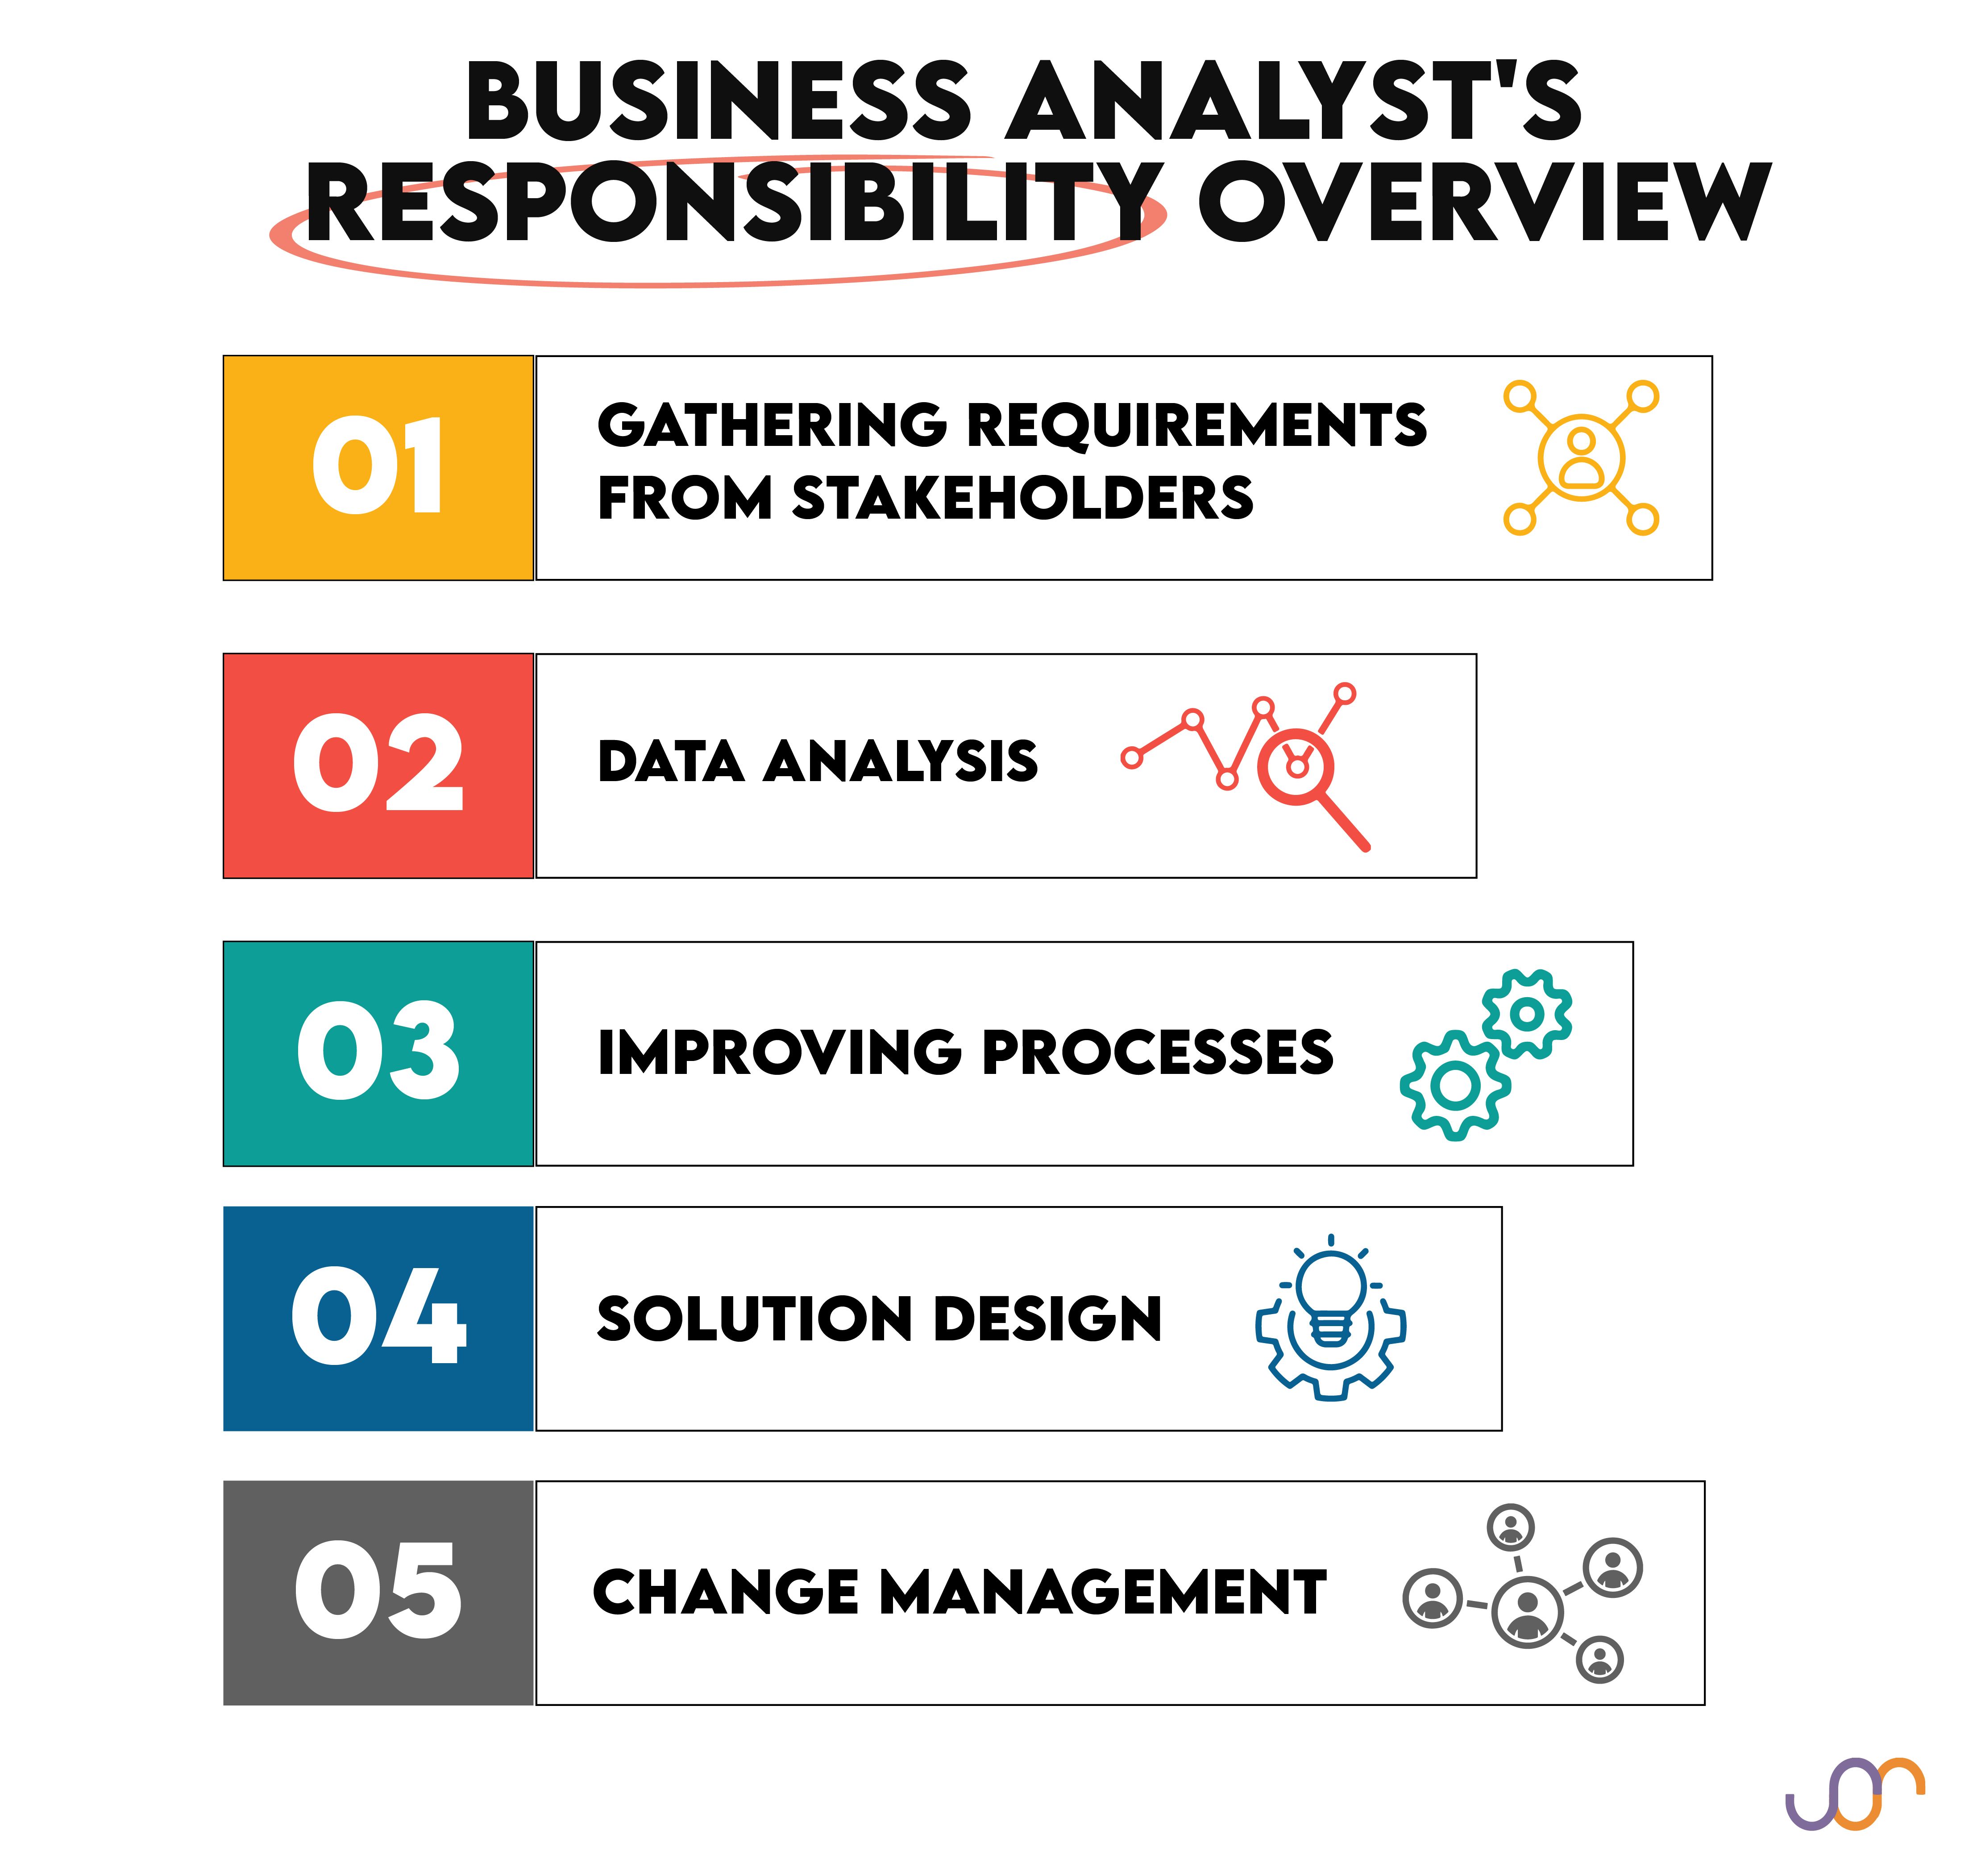 An Overview of What a Business Analyst Actually Does